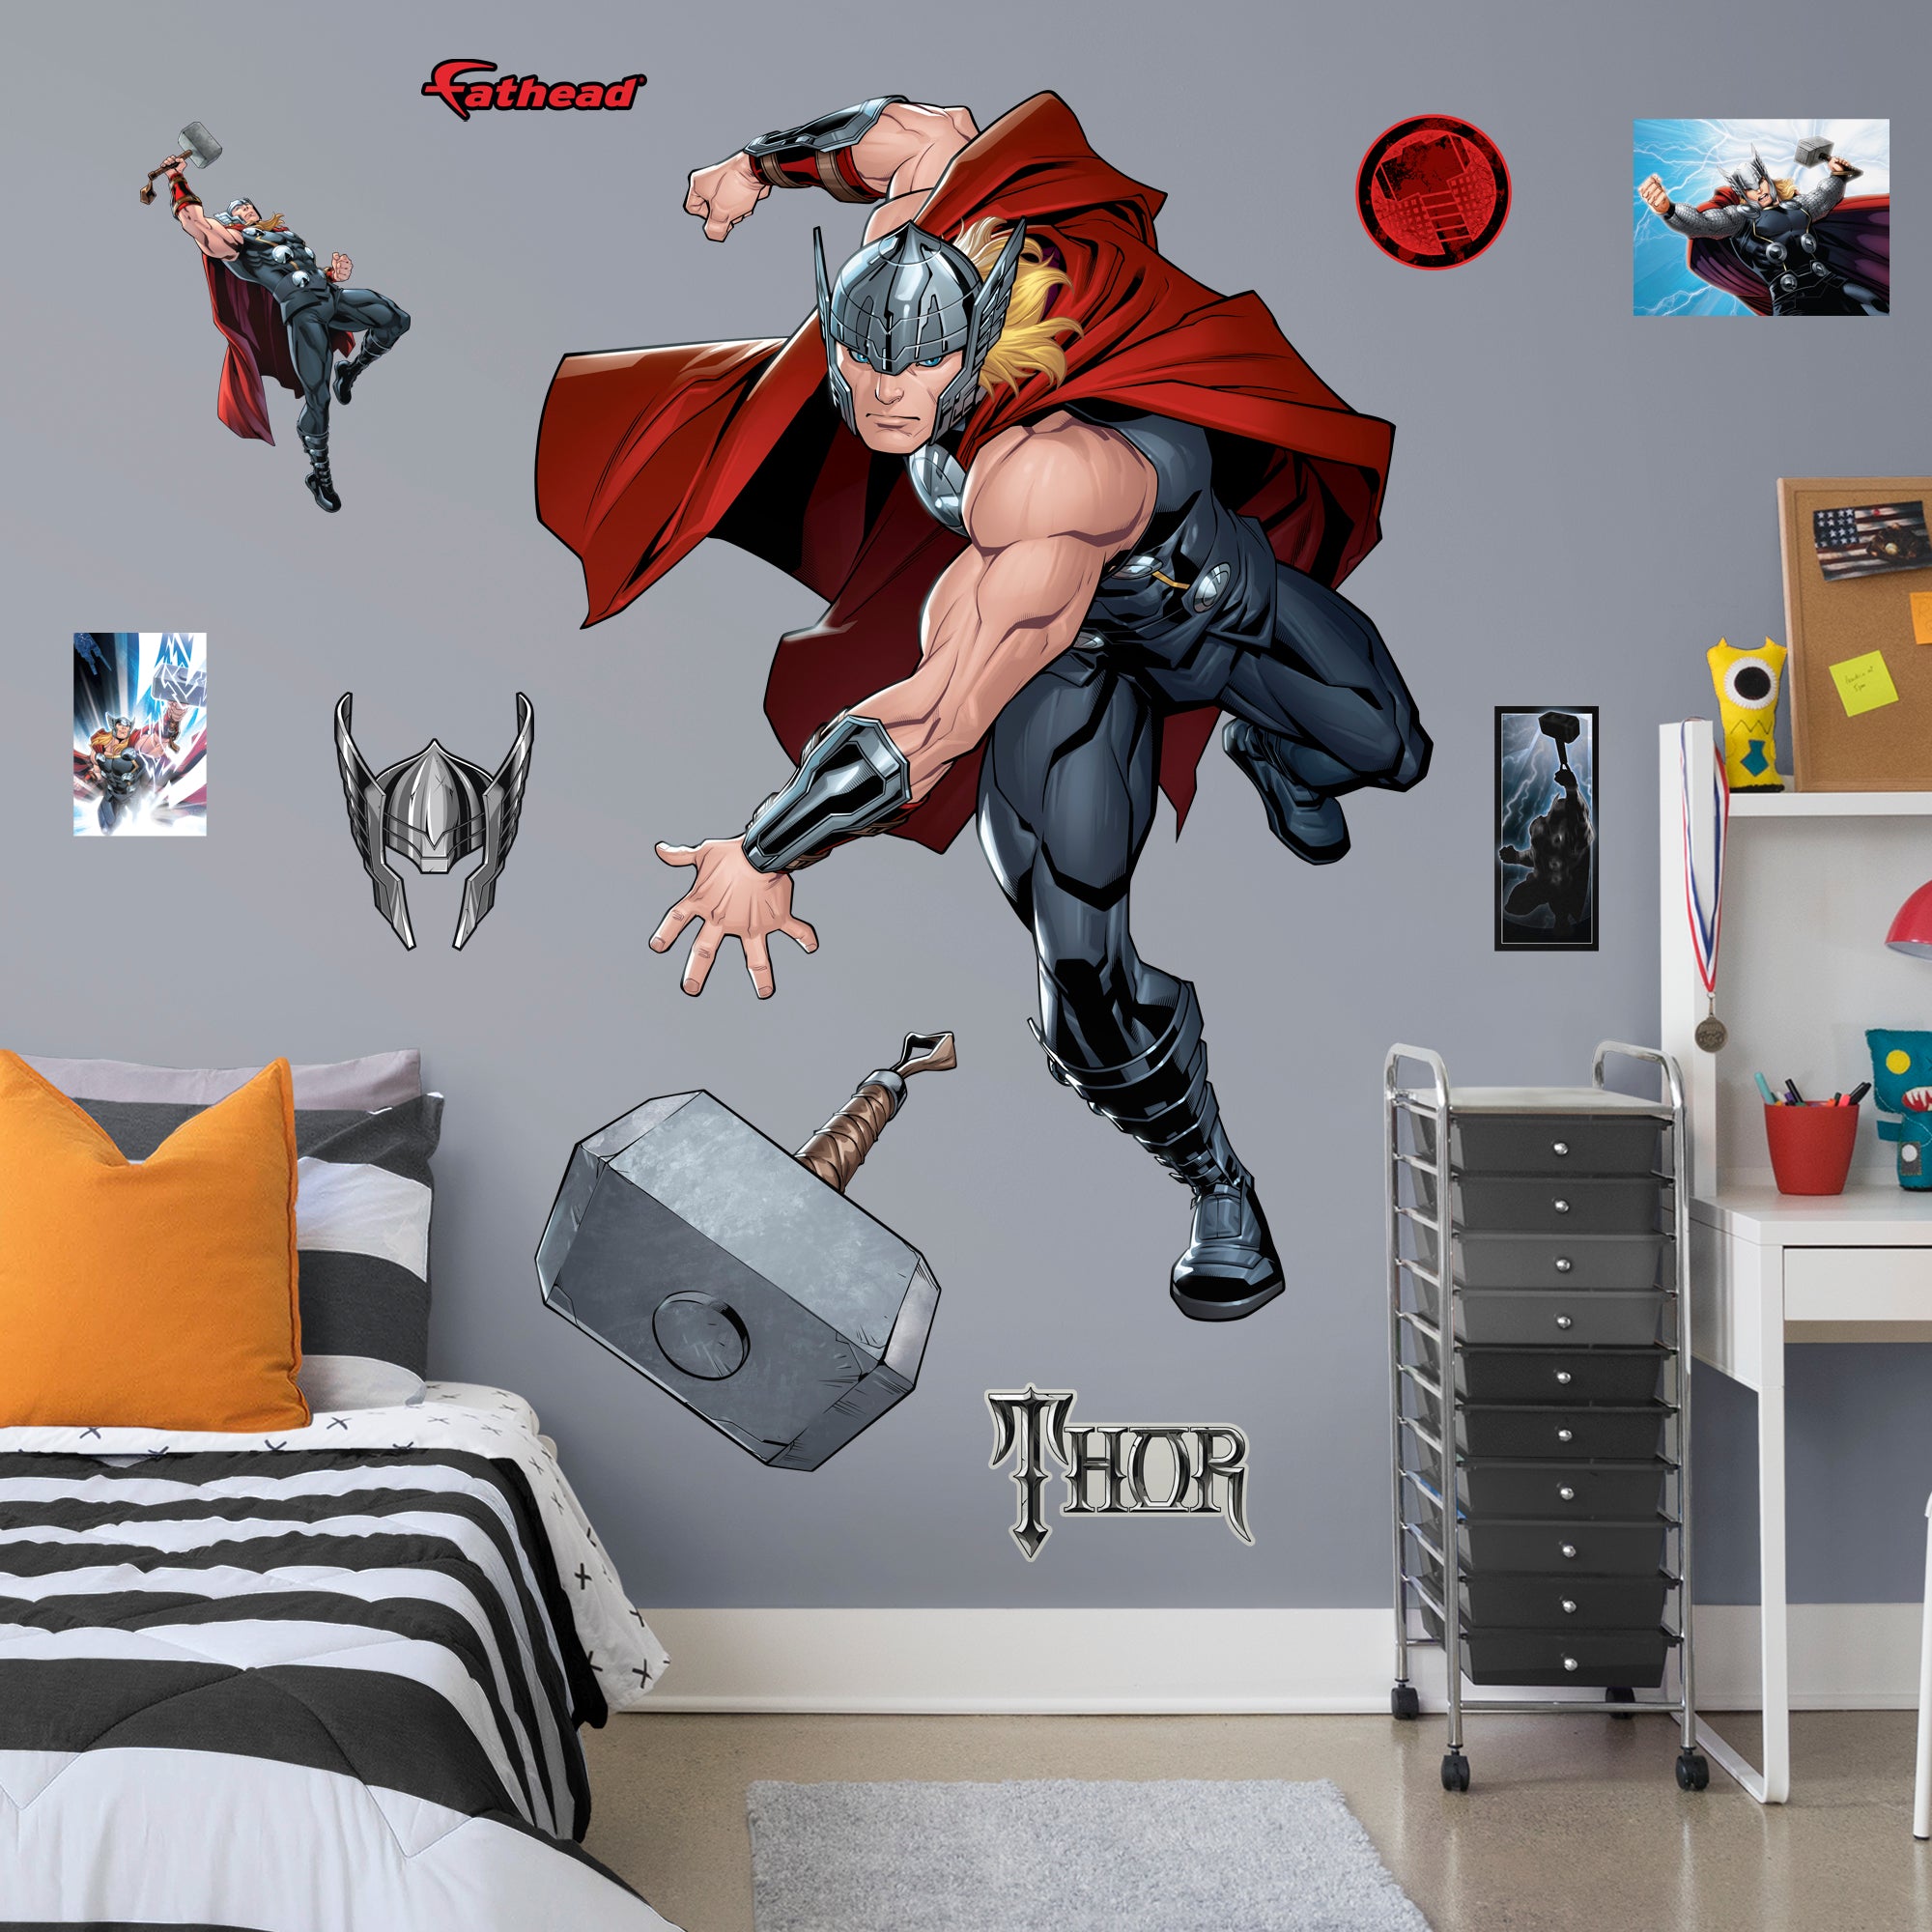 Thor: Avengers Core - Officially Licensed Removable Wall Decal Life-Size Character + 9 Decals (51"W x 78"H) by Fathead | Vinyl